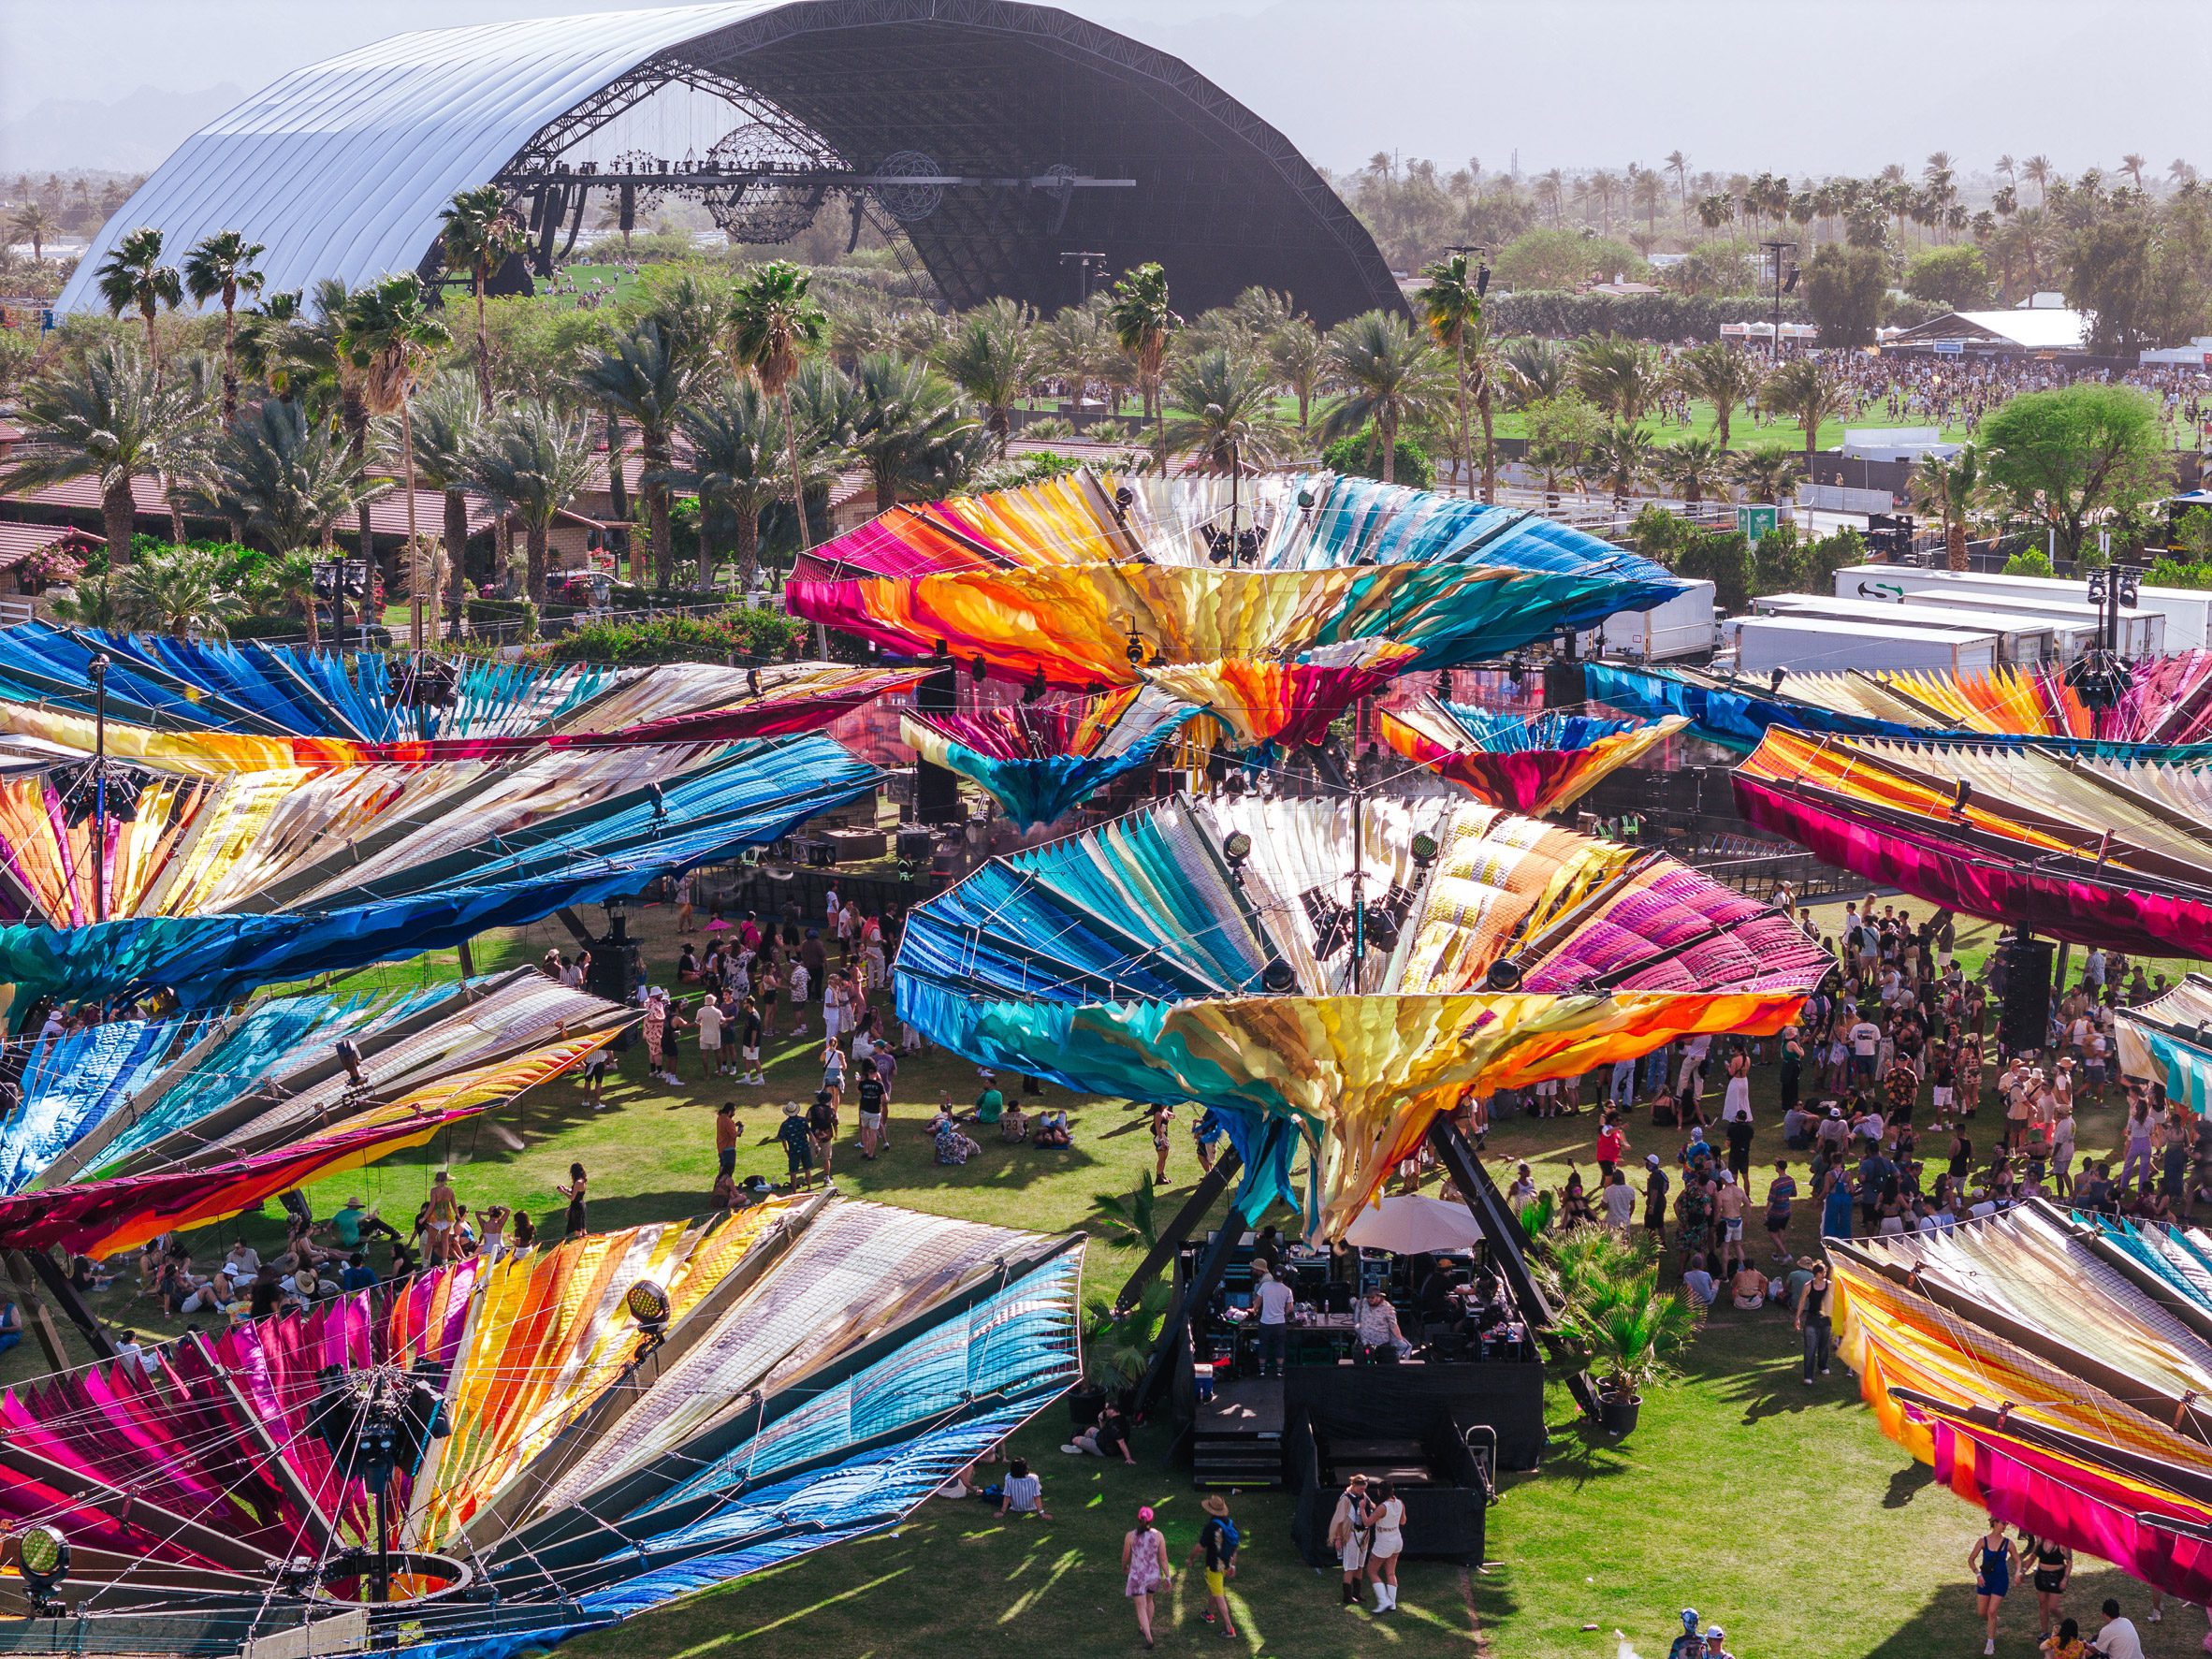 Floating fabric installations for Coachella